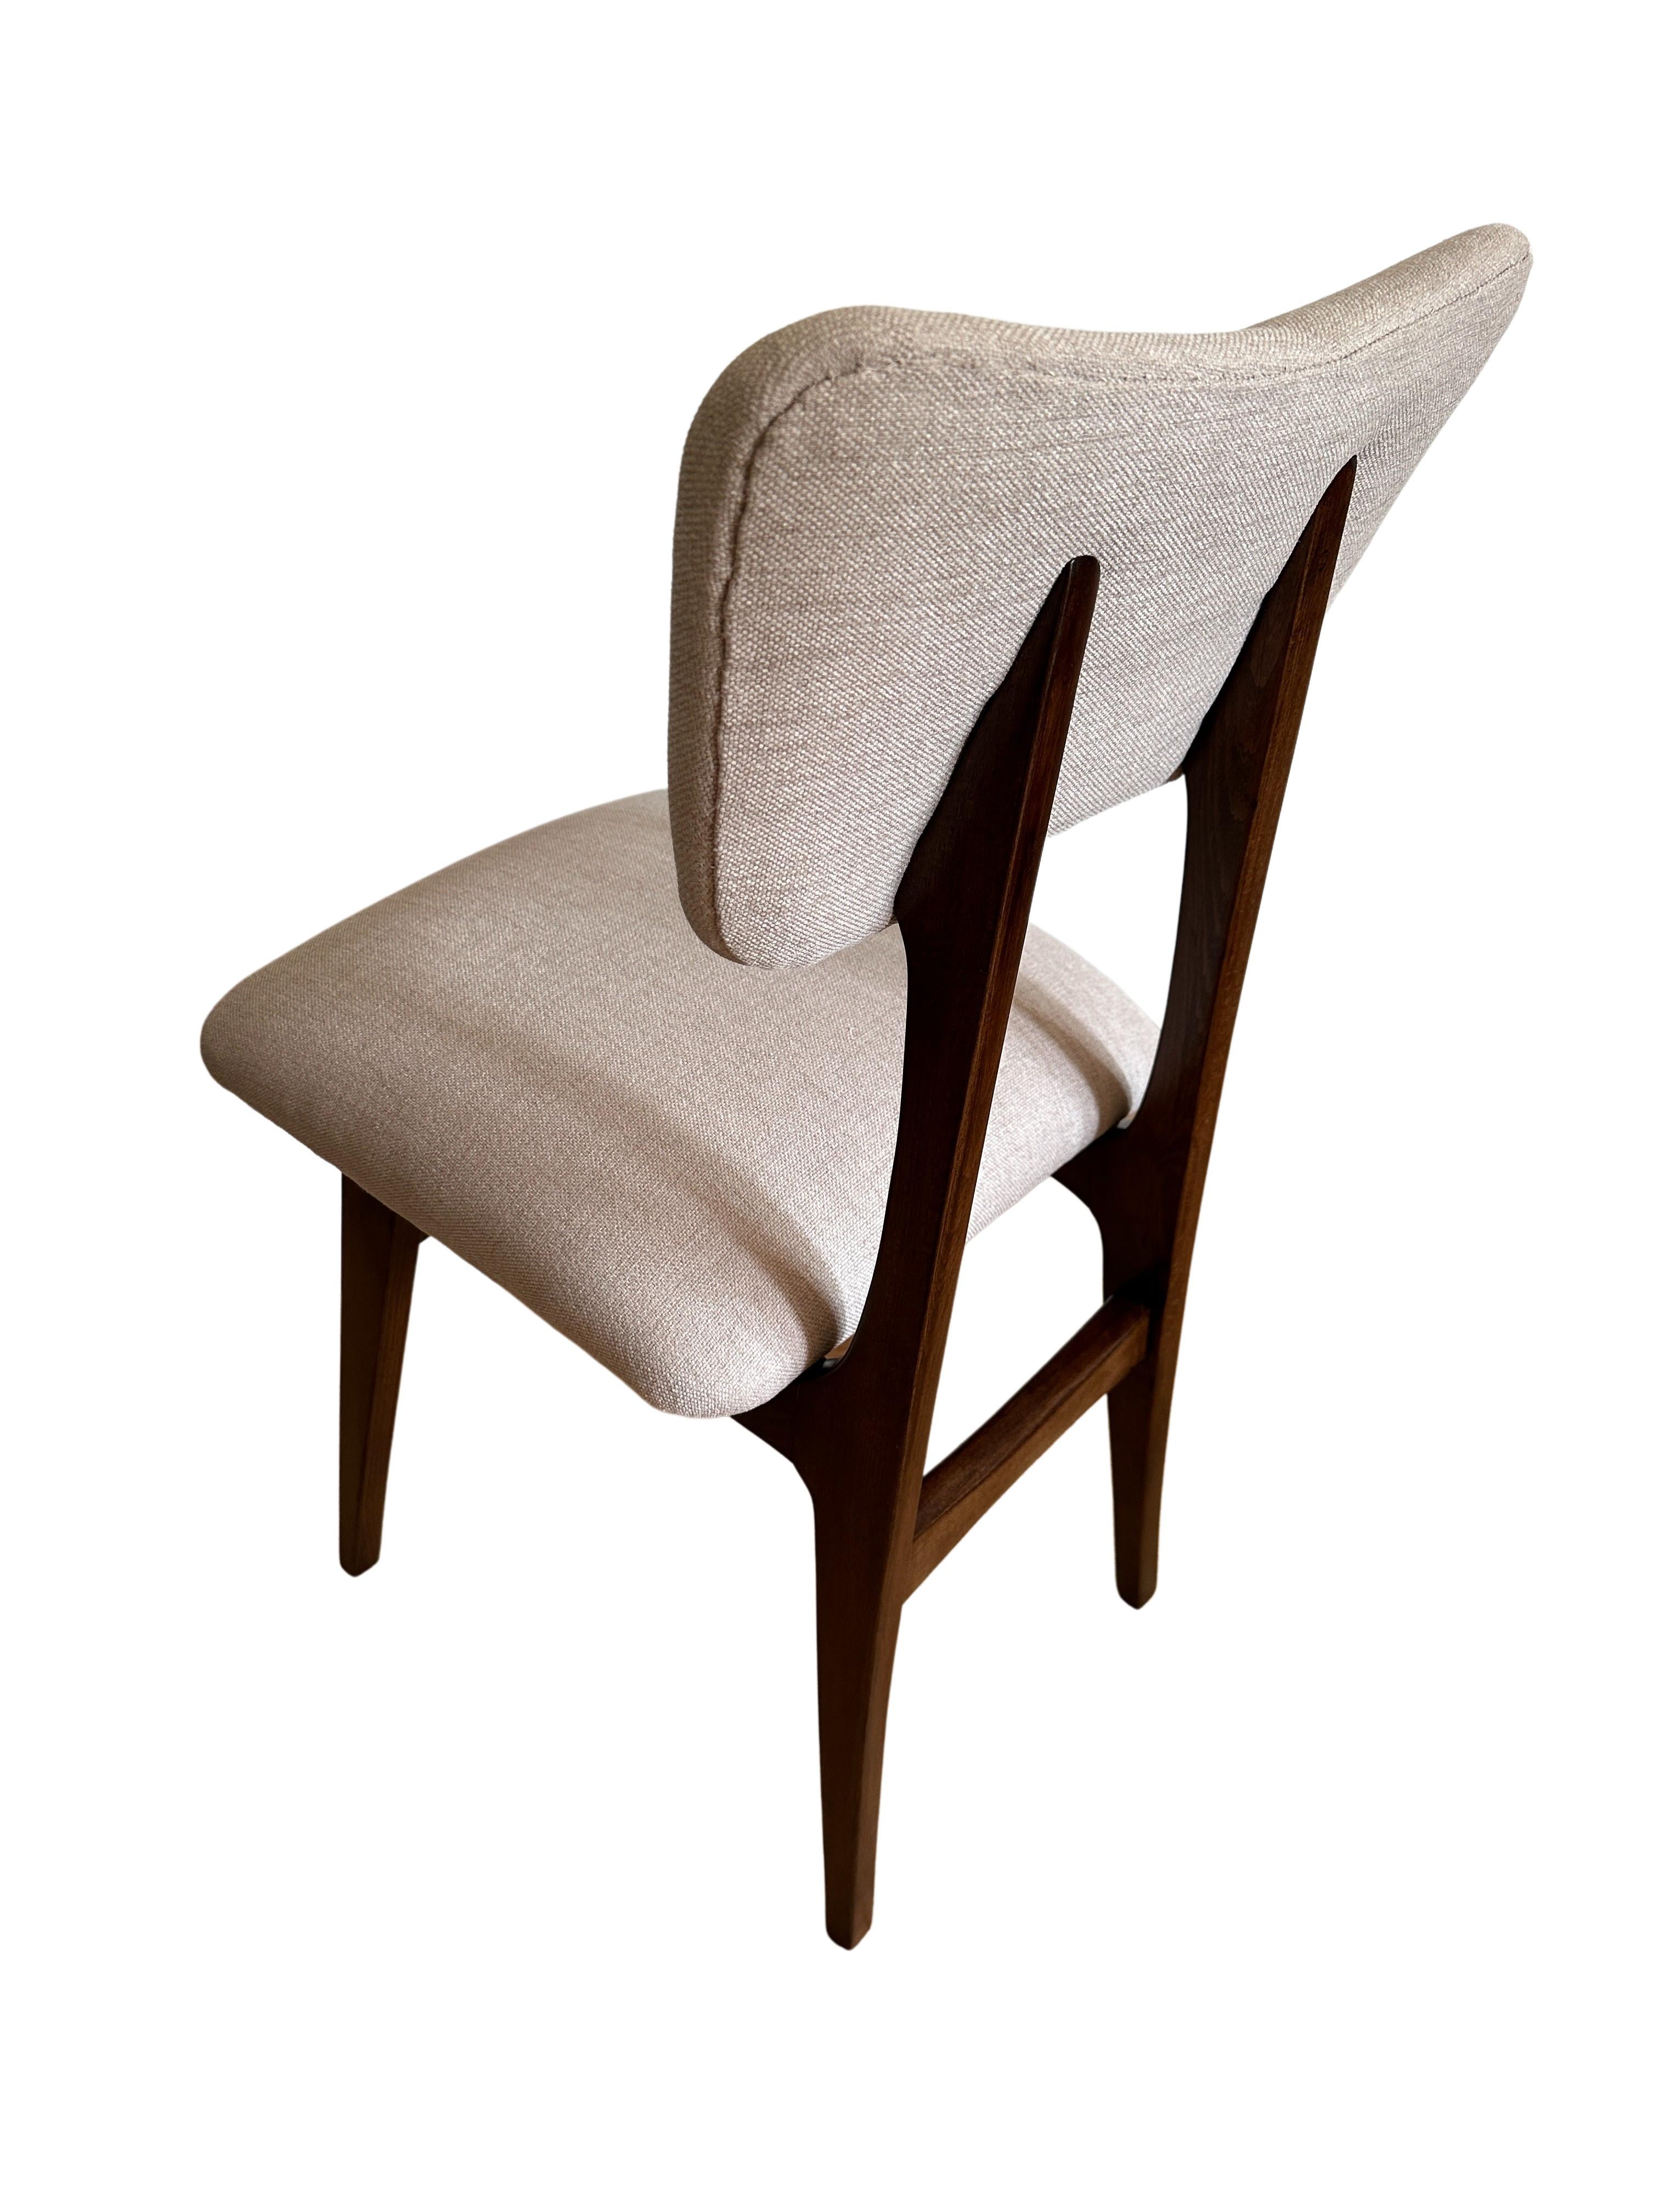 Bouclé Set of 2 Midcentury Beige and Grey Dining Chairs, Europe, 1960s For Sale